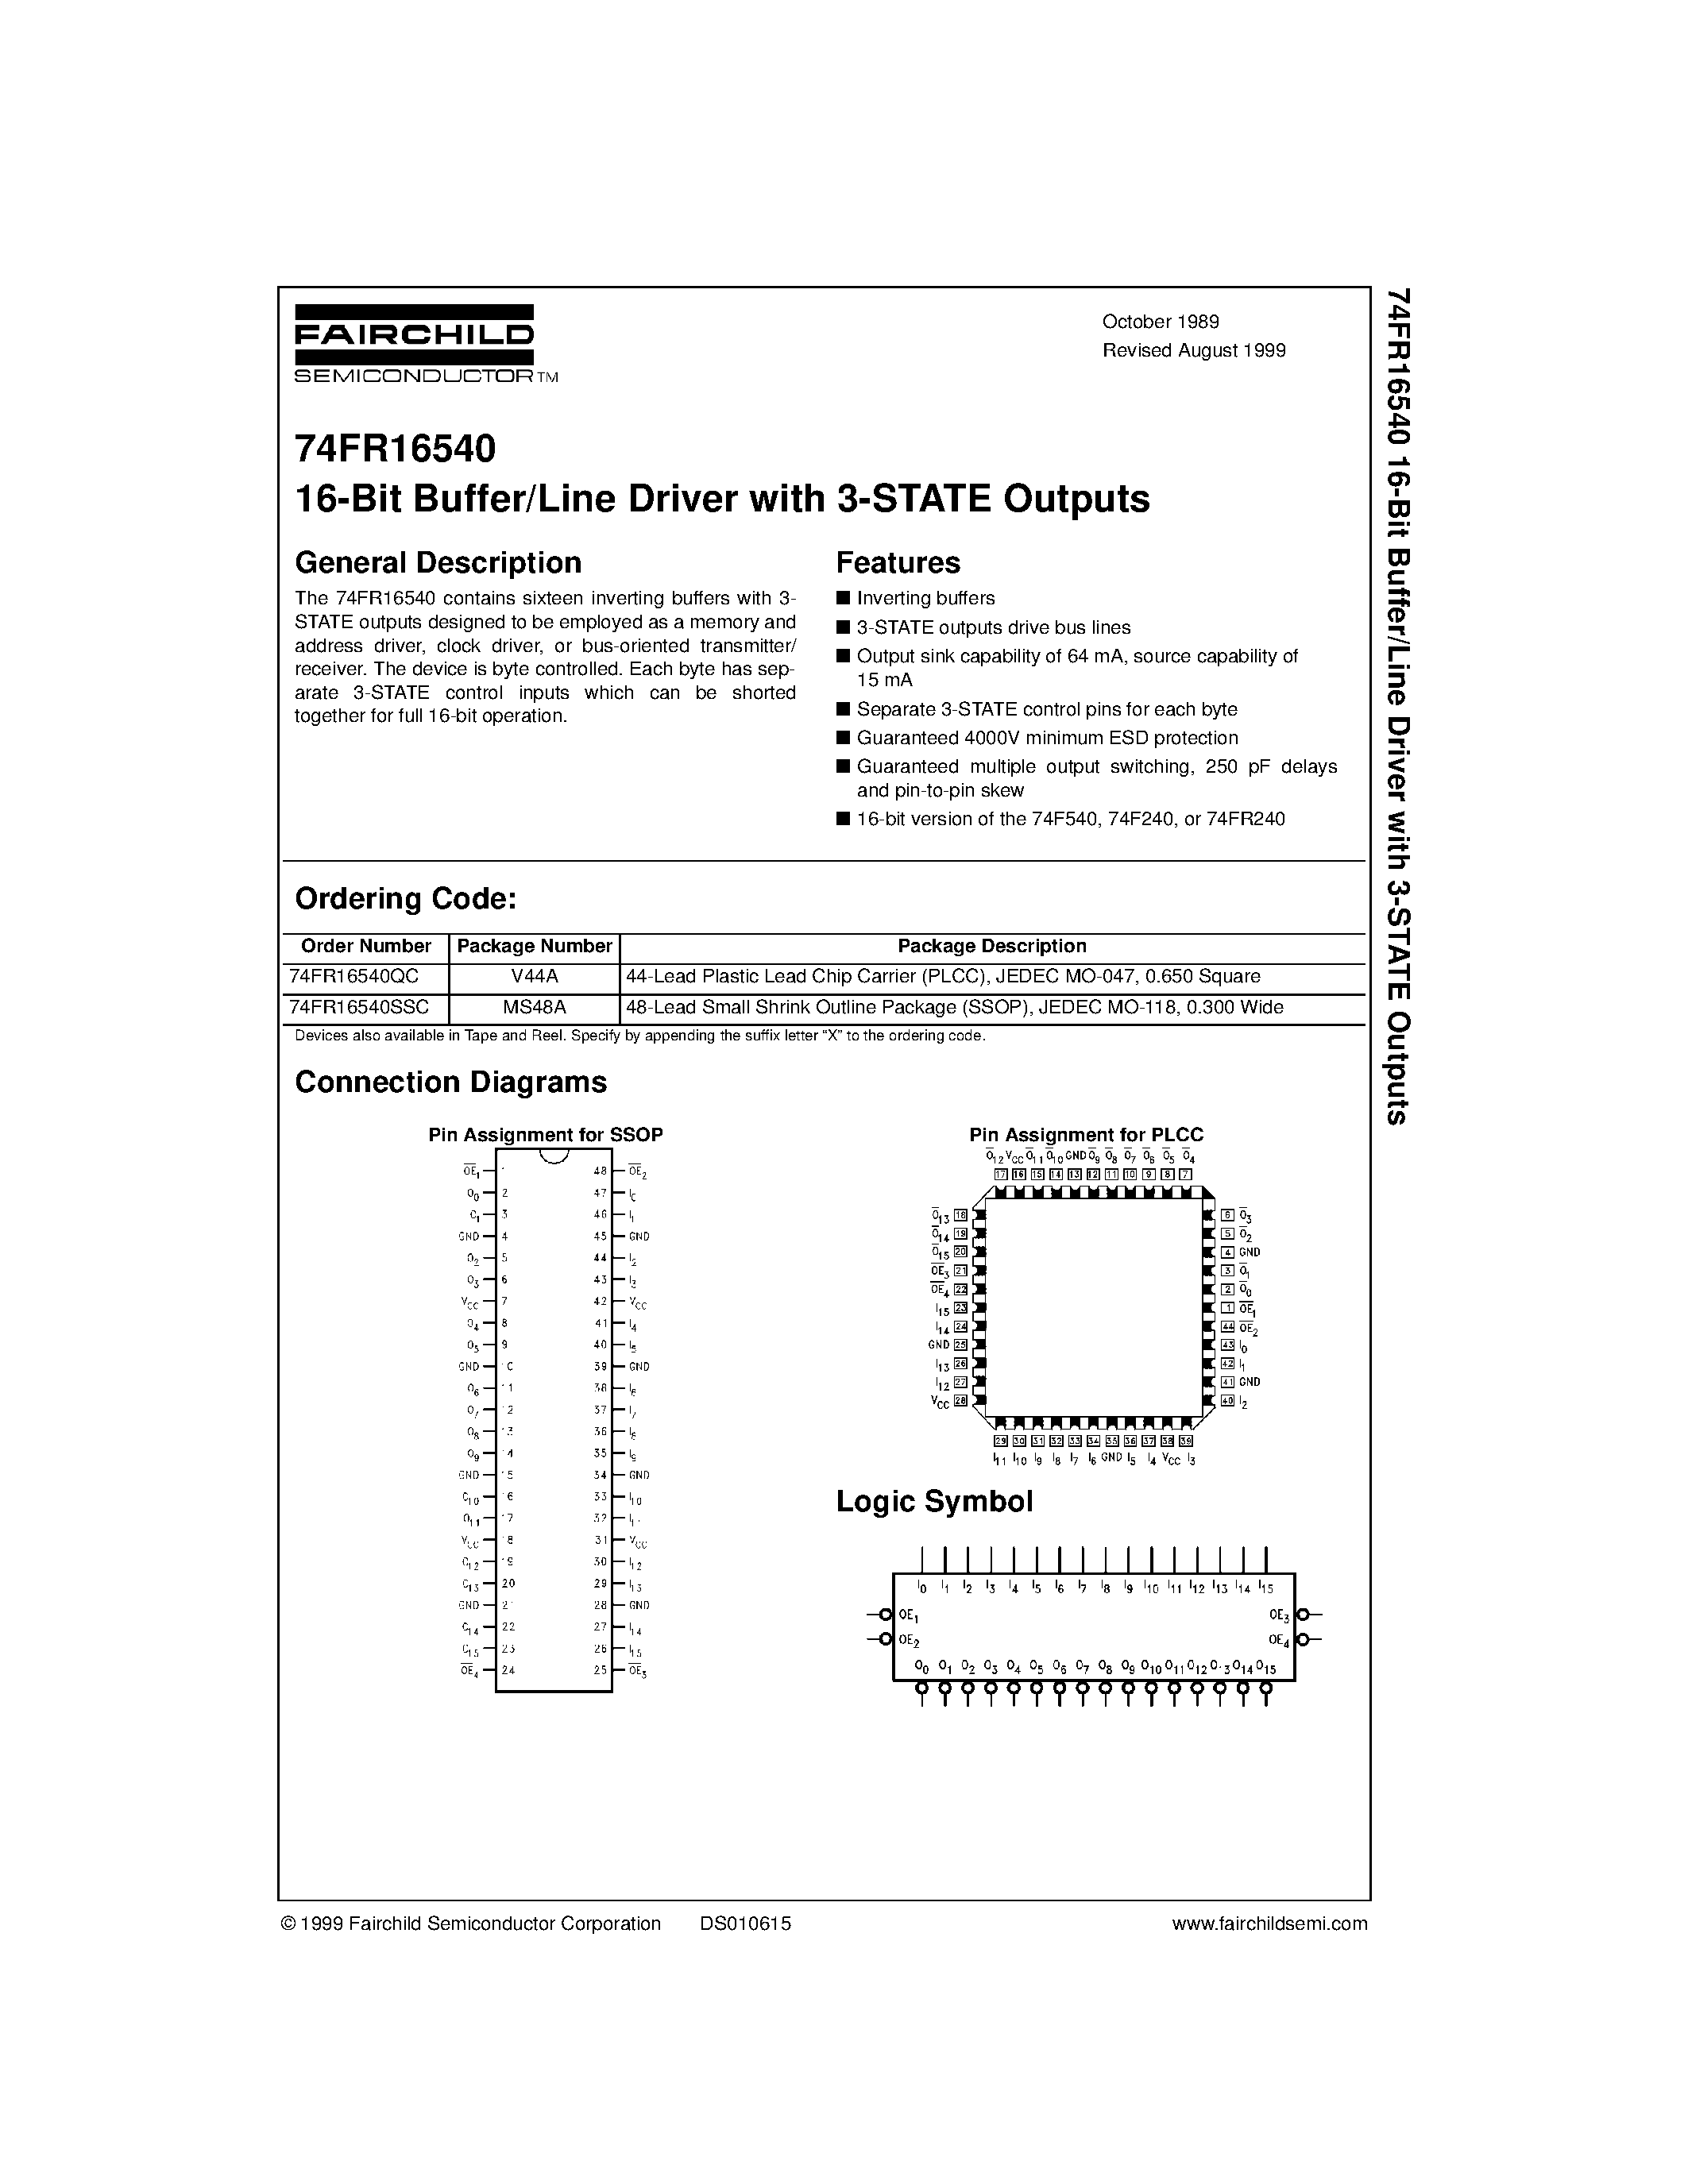 Datasheet 74FR16540QC - 16-Bit Buffer/Line Driver with 3-STATE Outputs page 1